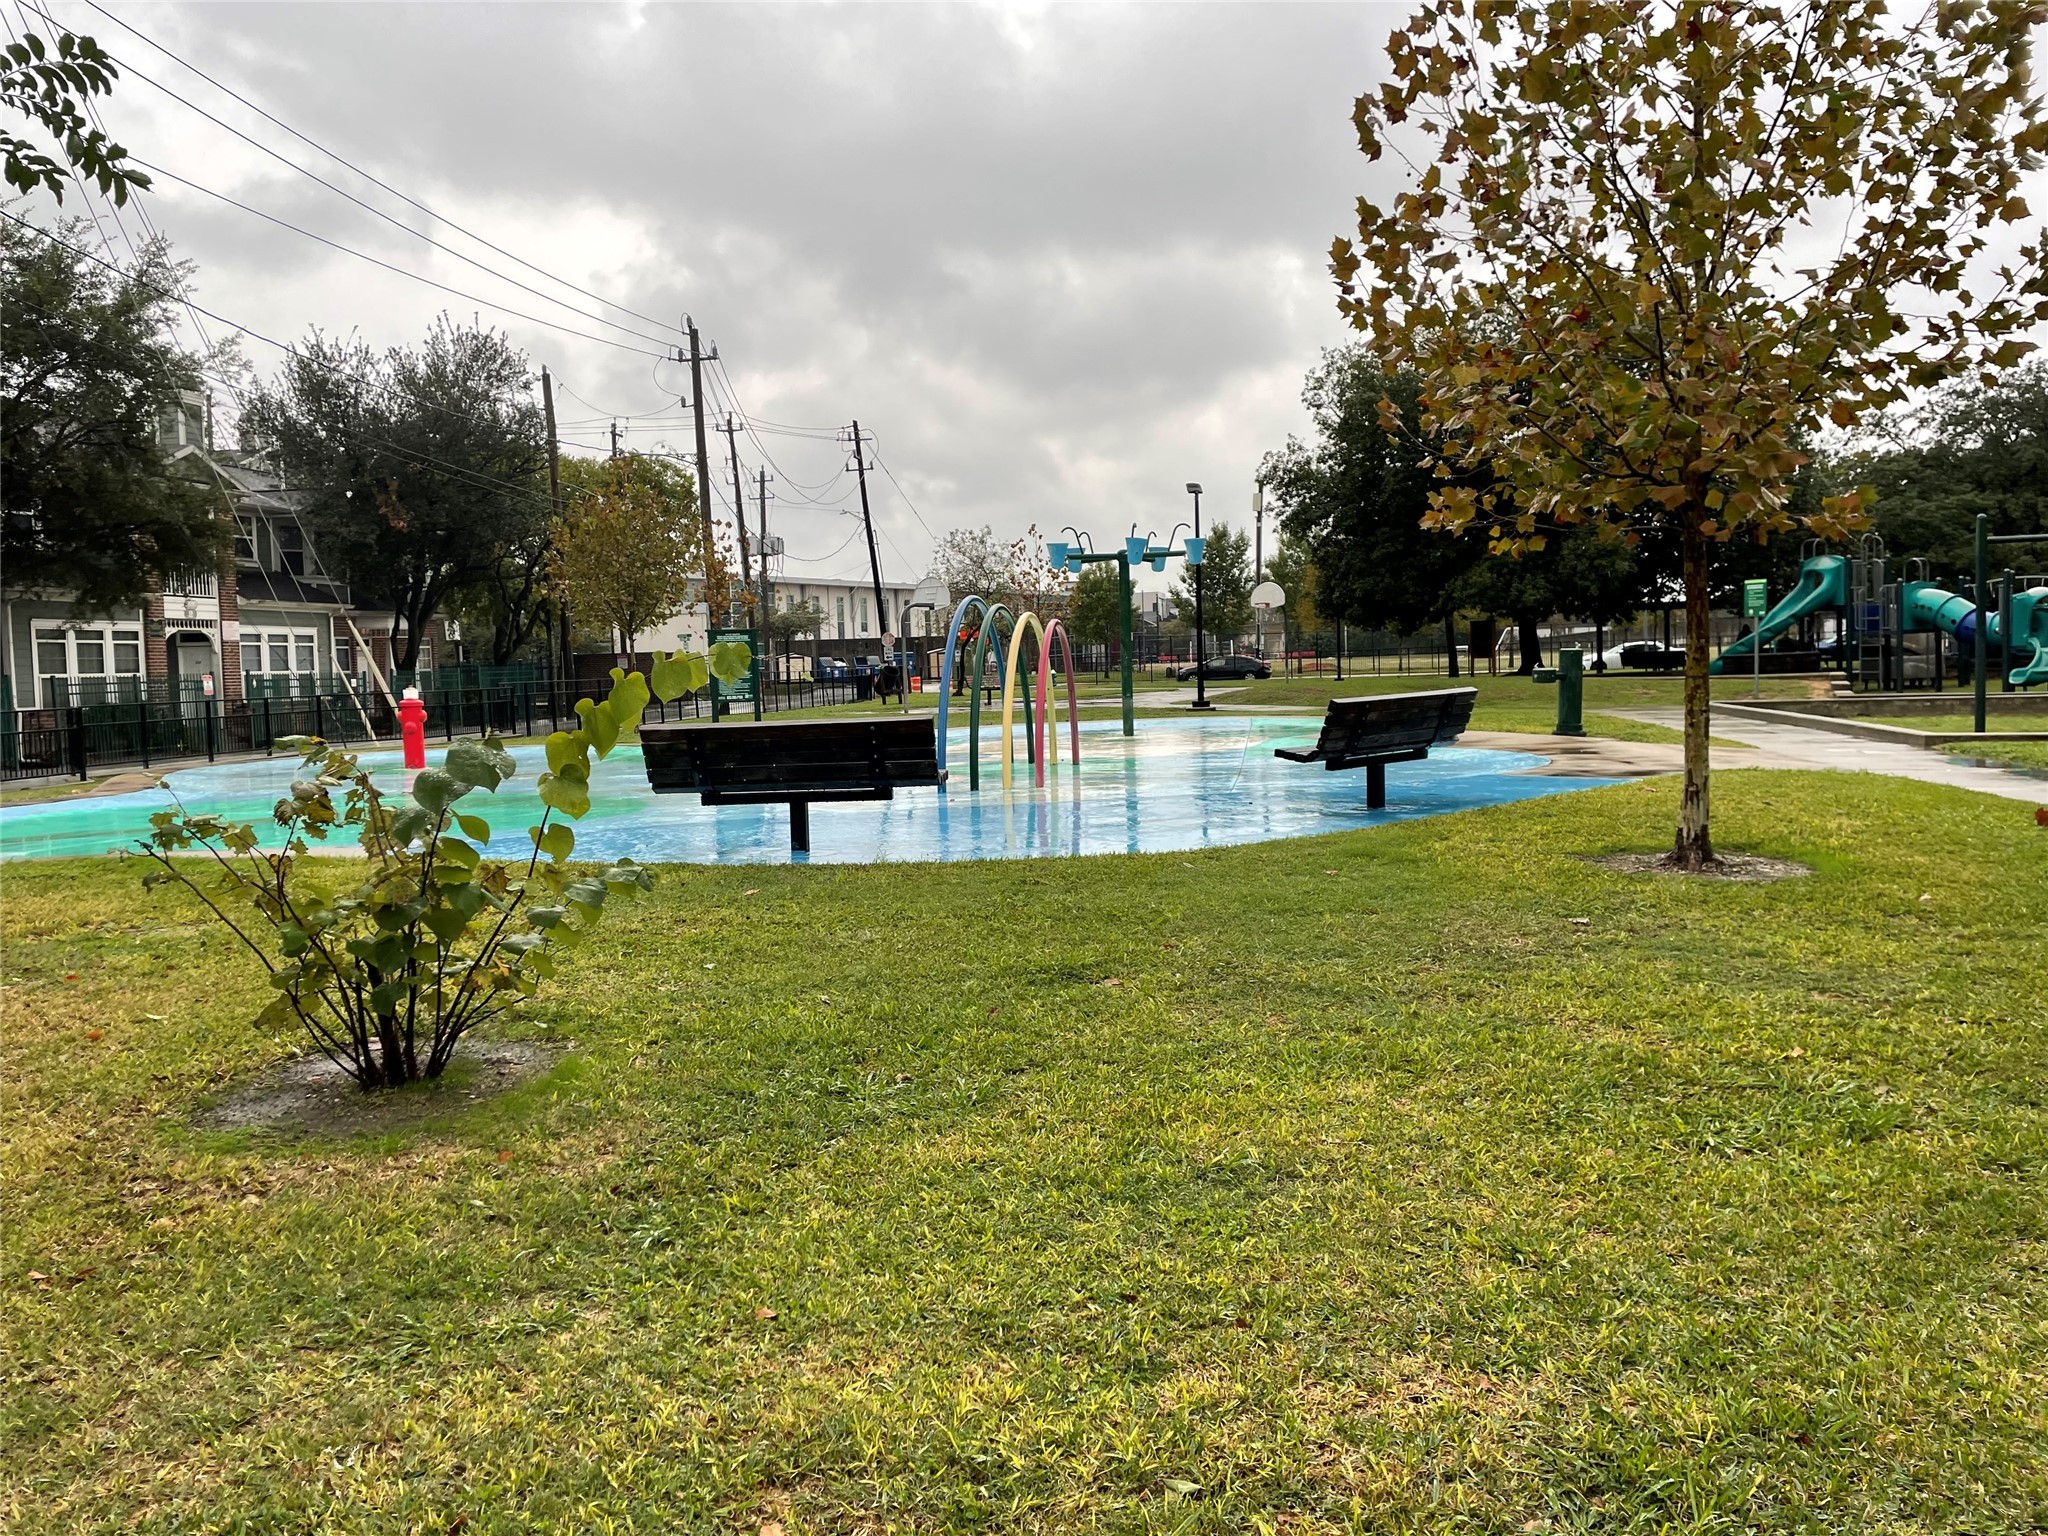 Wiley Park around corner has playground and water feature